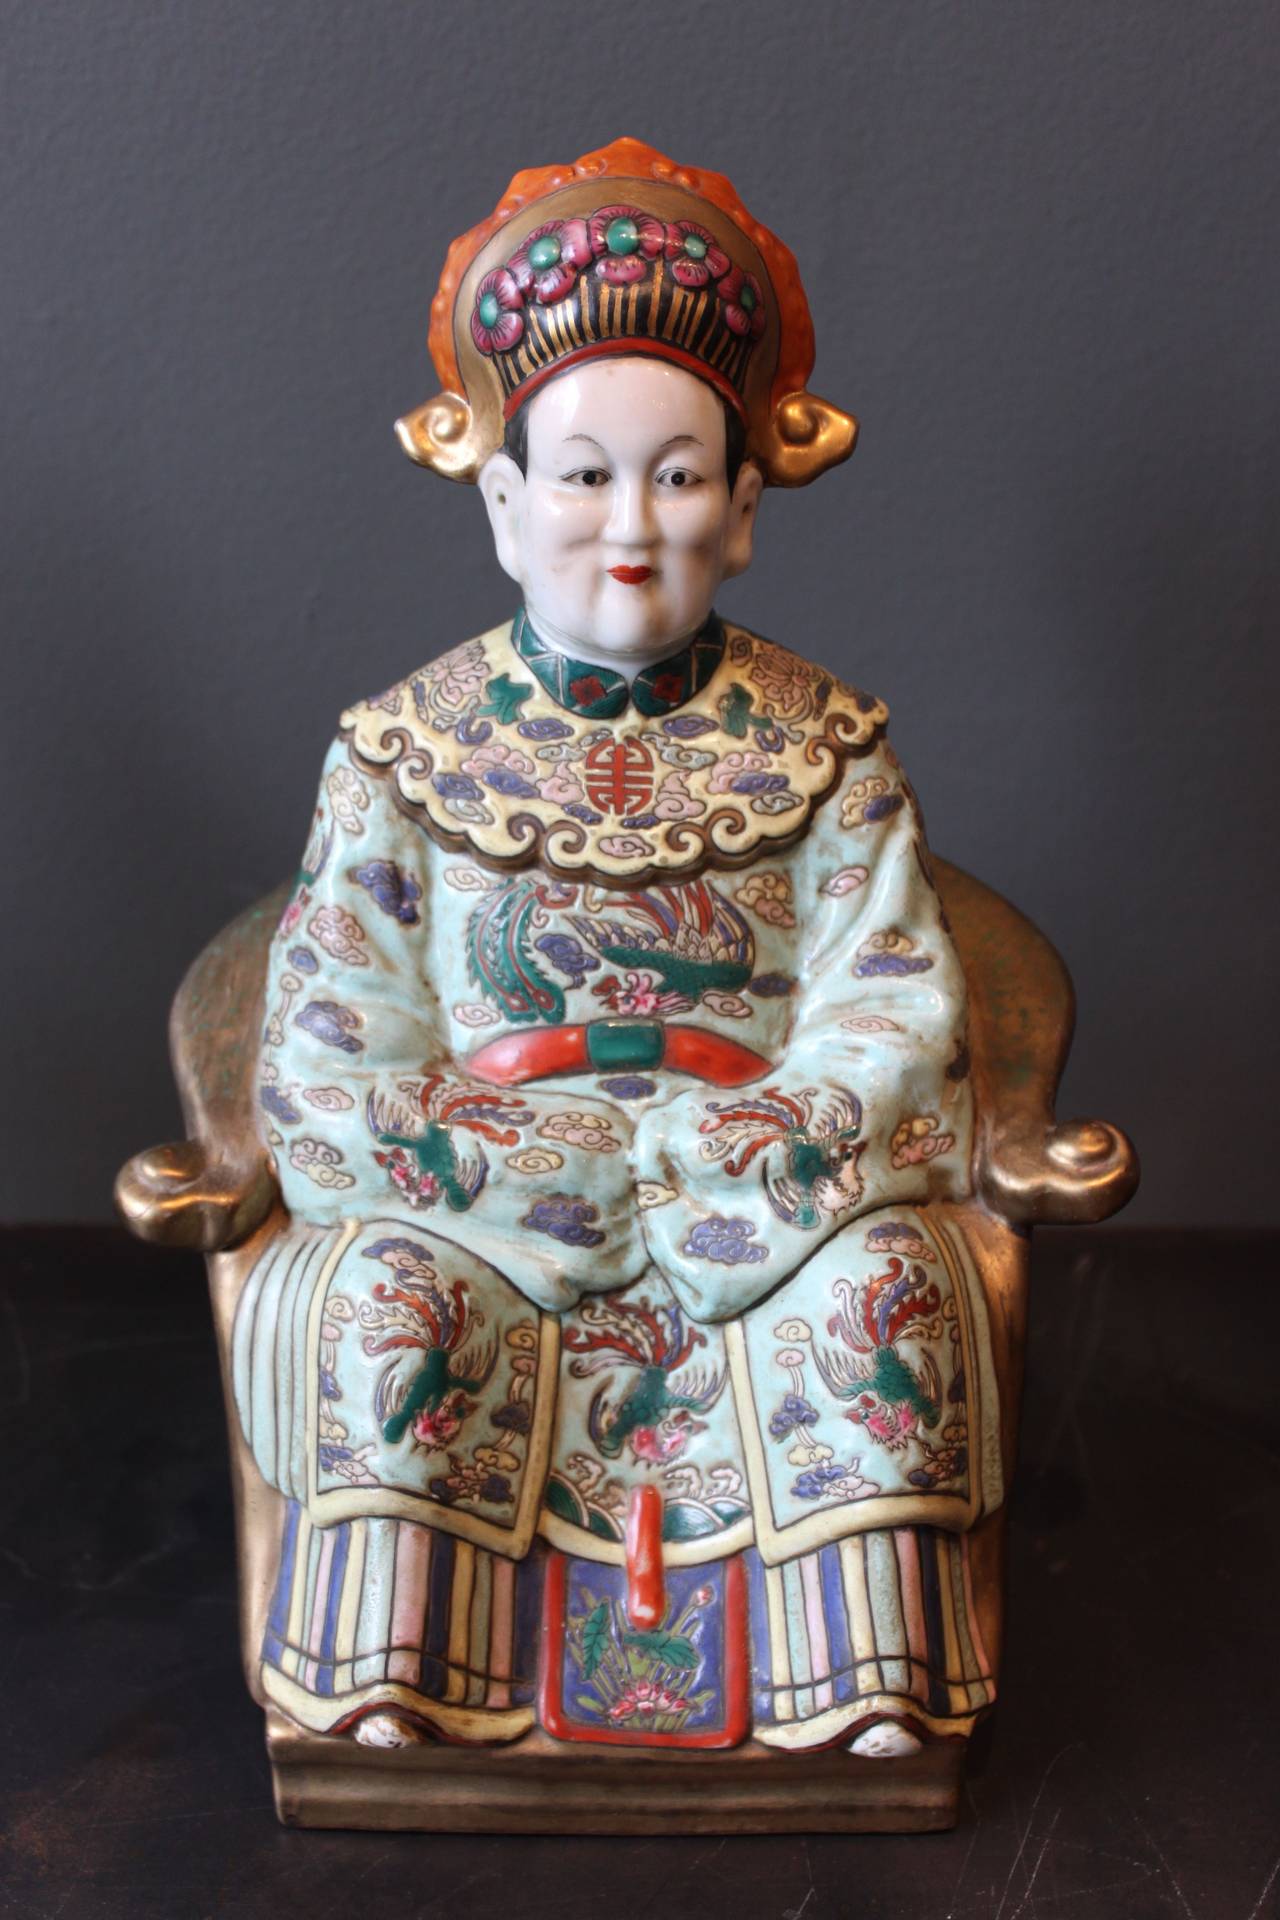 Chinese Export Polychrome Chinese Porcelain Seated Figures of a Man and Woman